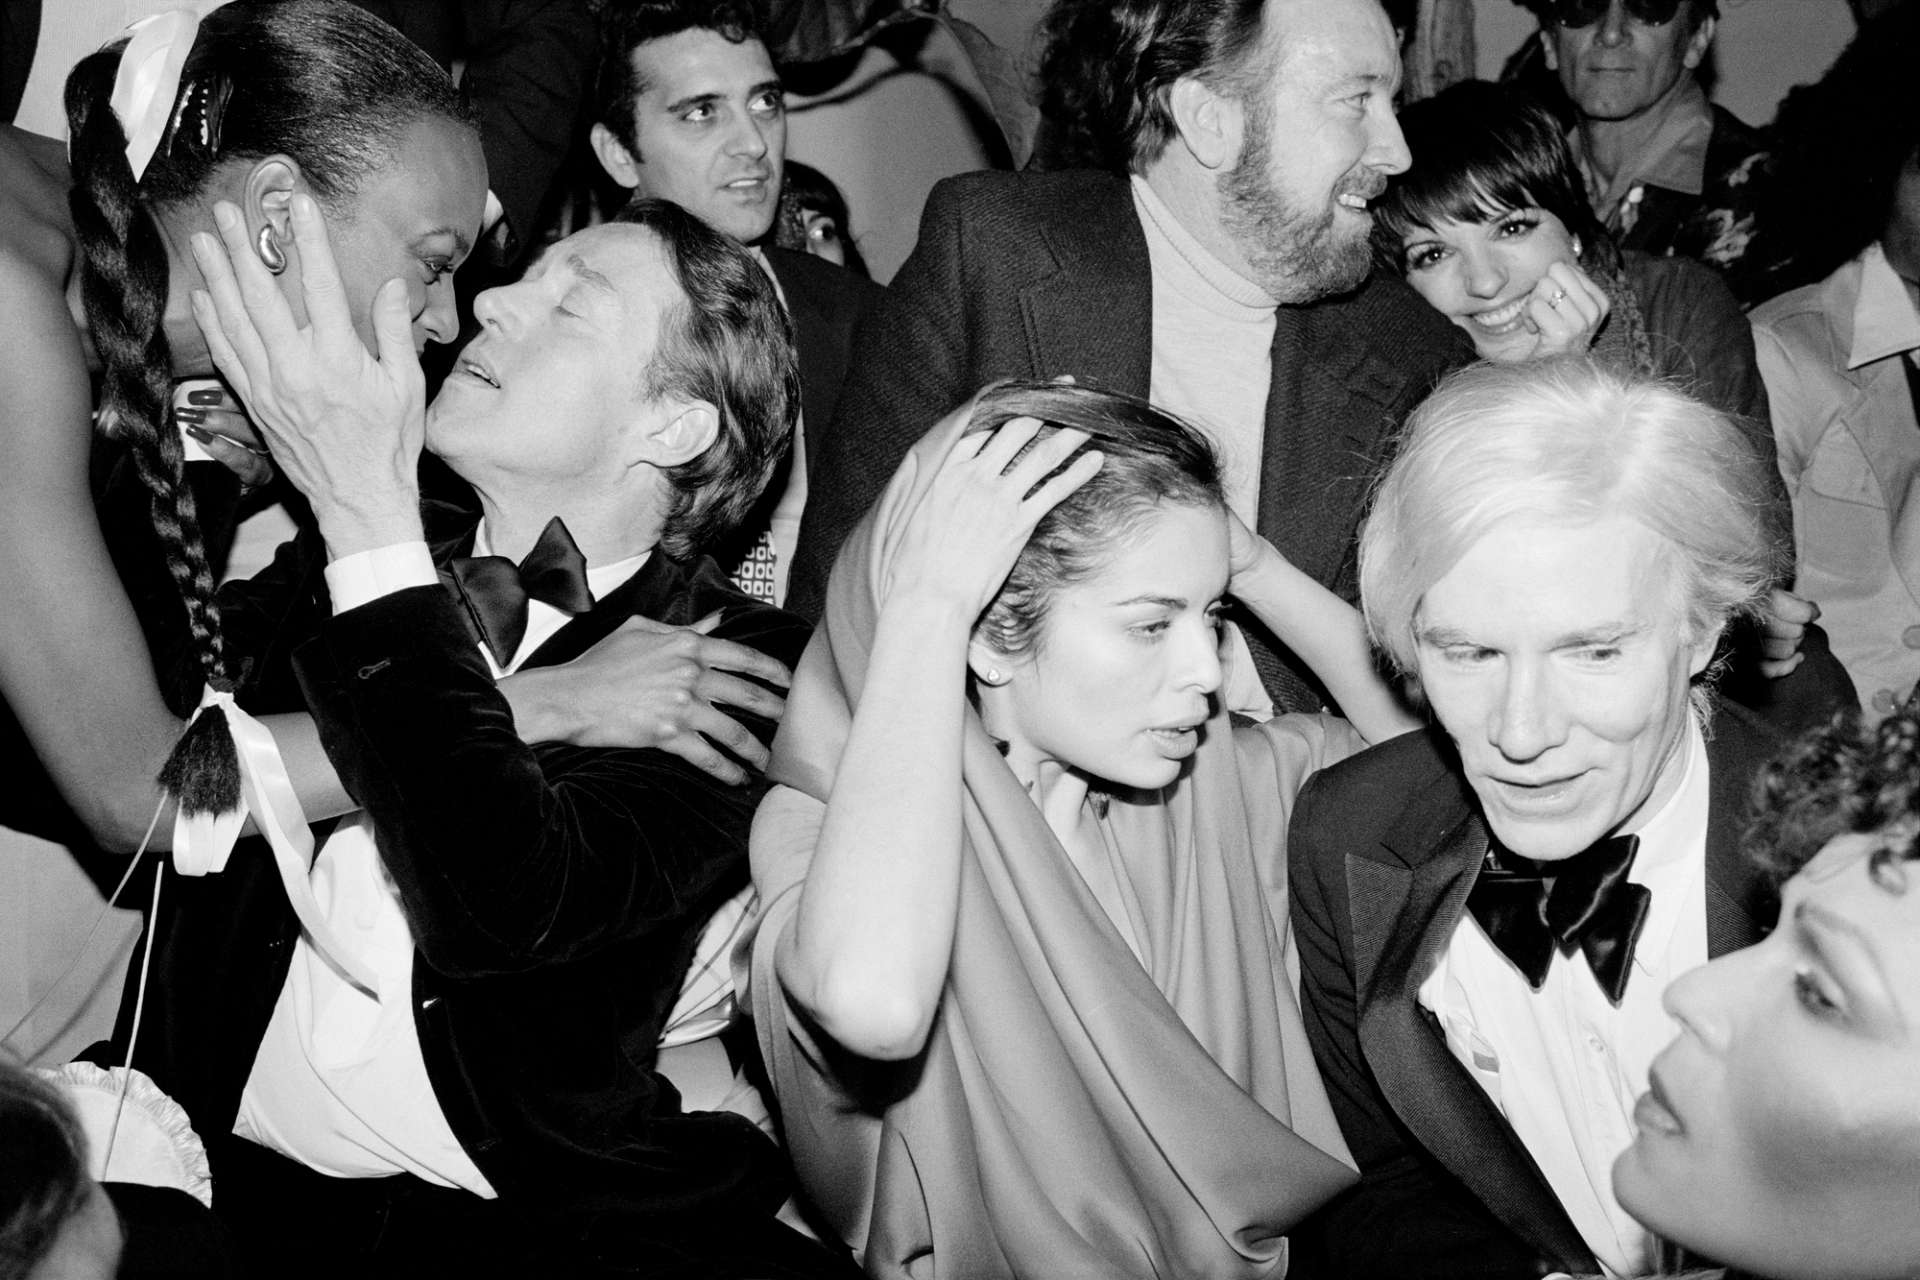 A black and white photograph by Robin Platzer showing Bianca Jagger, Halston, Liza Minnelli, Jack Halay Jr and Andy Warhol partying at Studio 54 at the centre of the frame